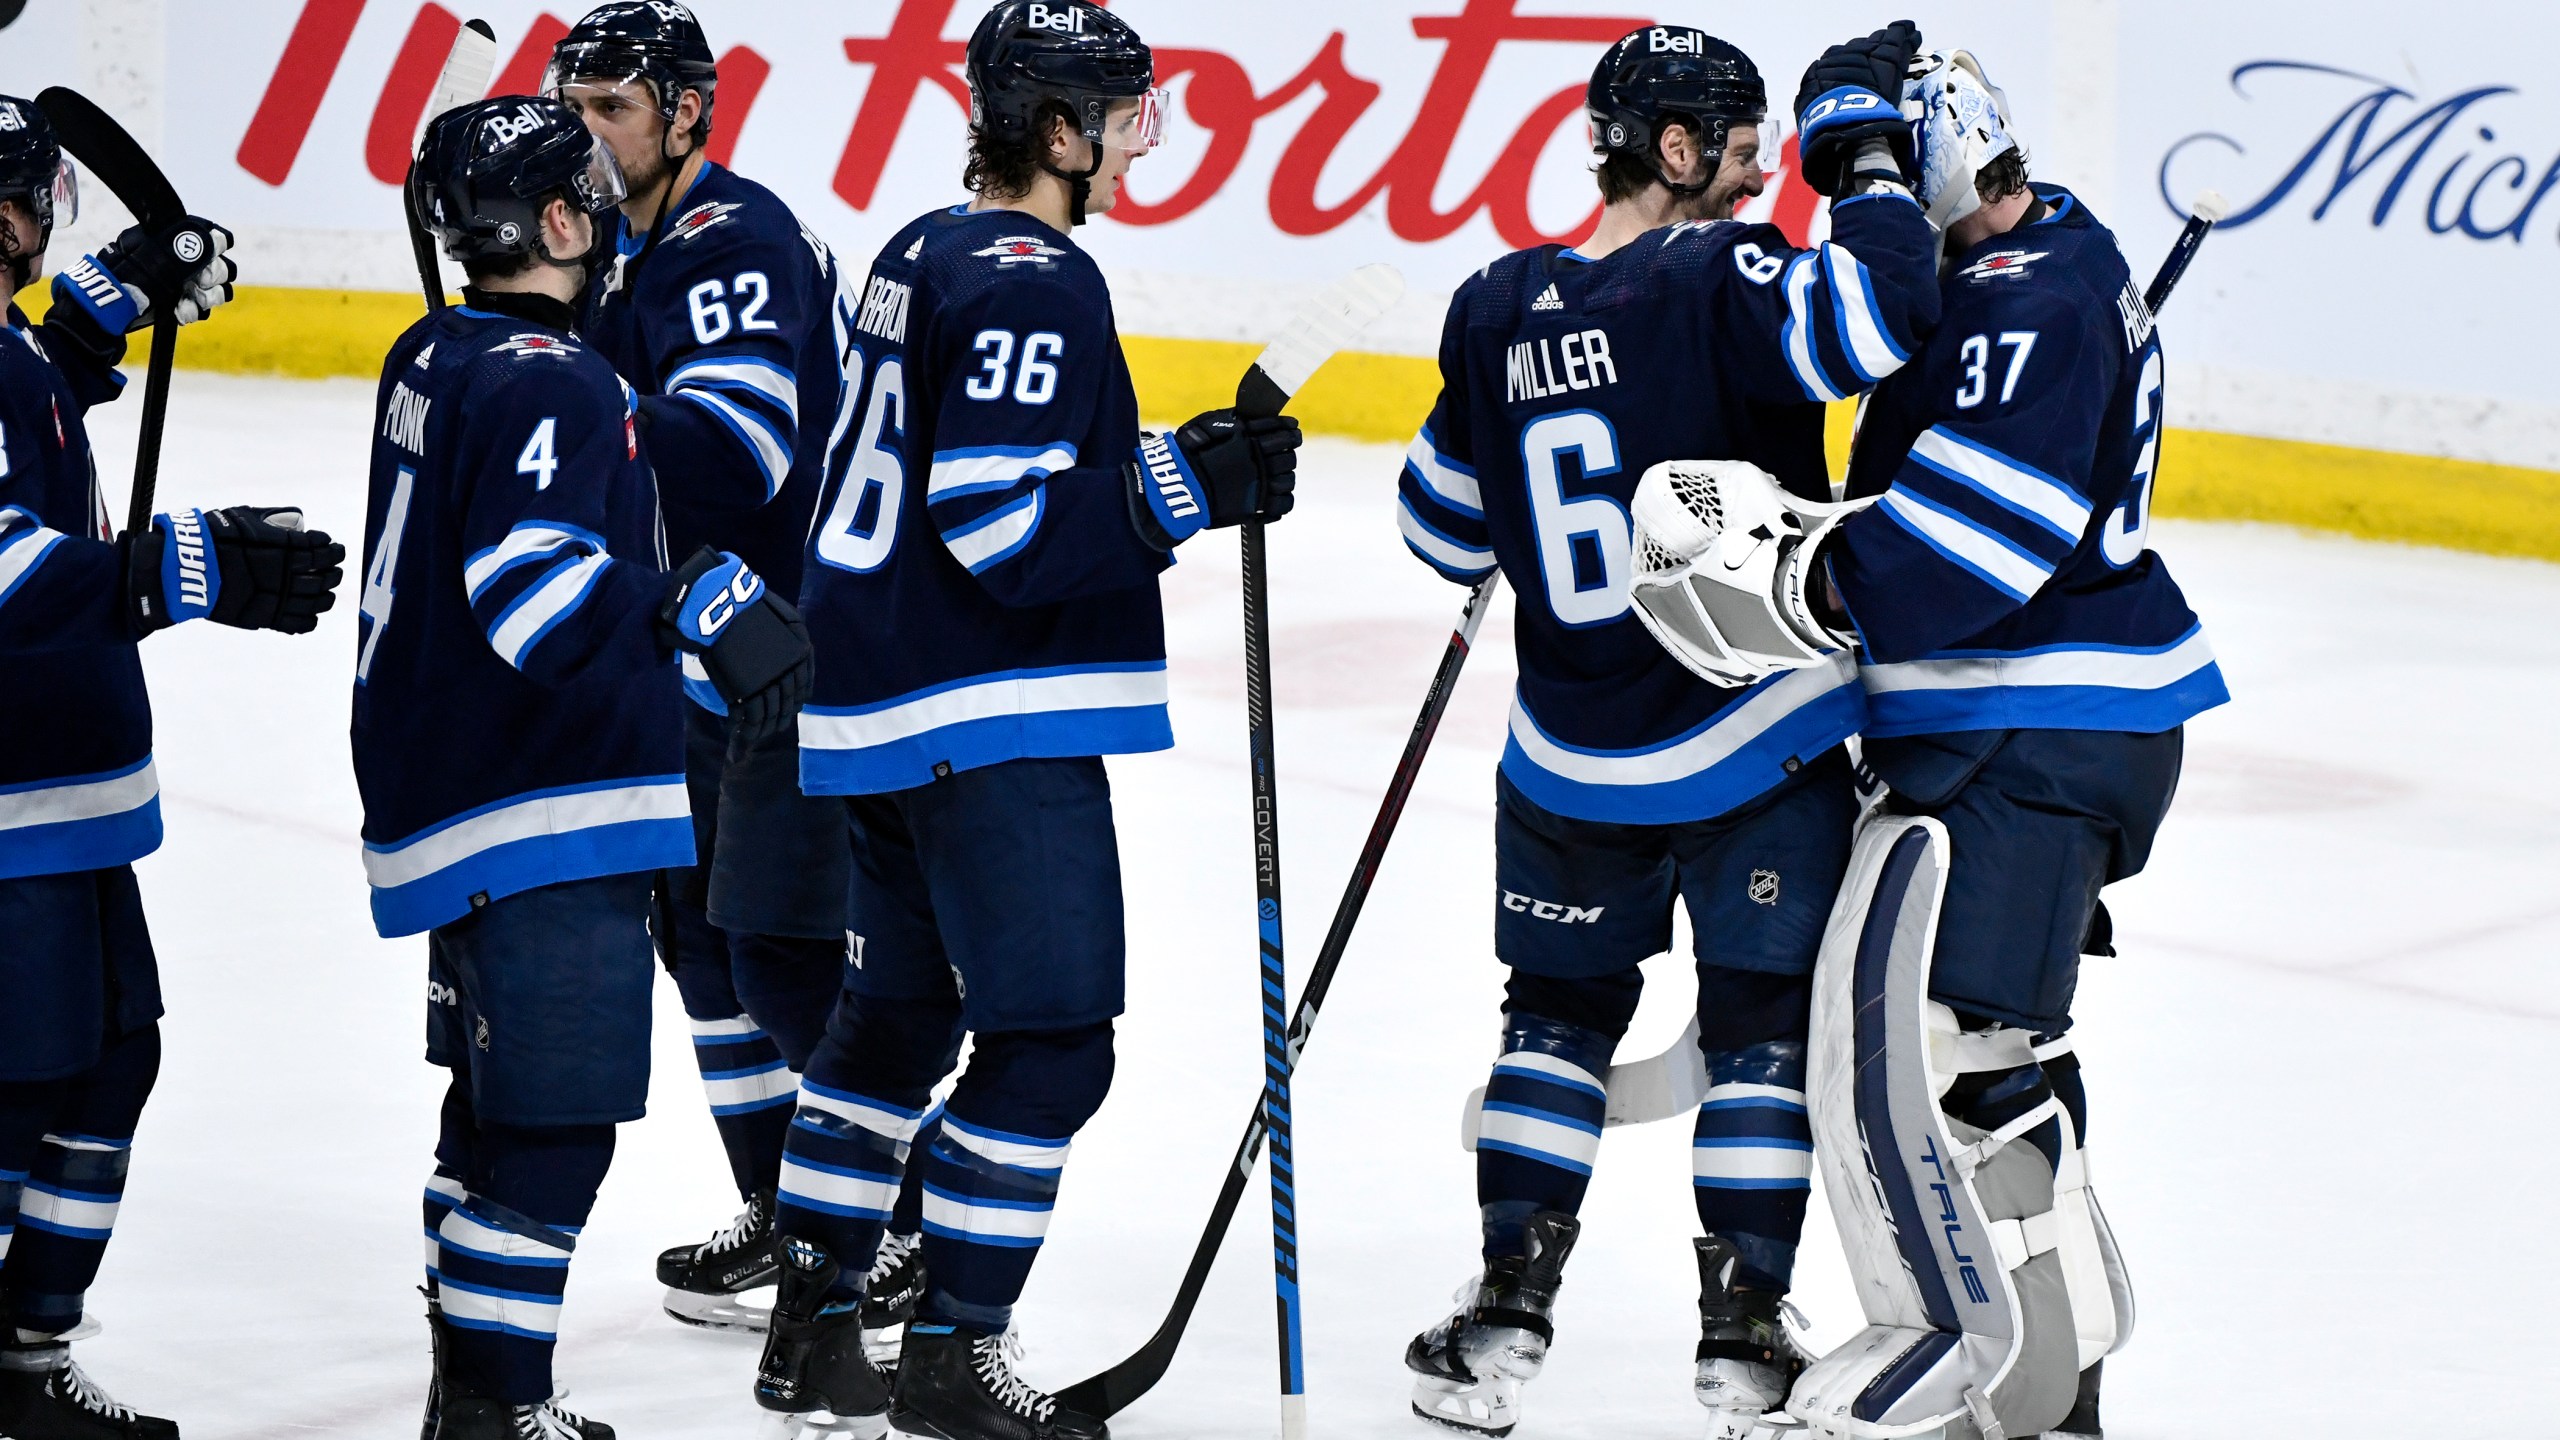 Winnipeg Jets goaltender Connor Hellebuyck (37) celebrates after his shutout against the Washington Capitals with Colin Miller (6) and other teammates after an NHL hockey game in Winnipeg, Manitoba, Monday March 11, 2024. (Fred Greenslade/The Canadian Press via AP)